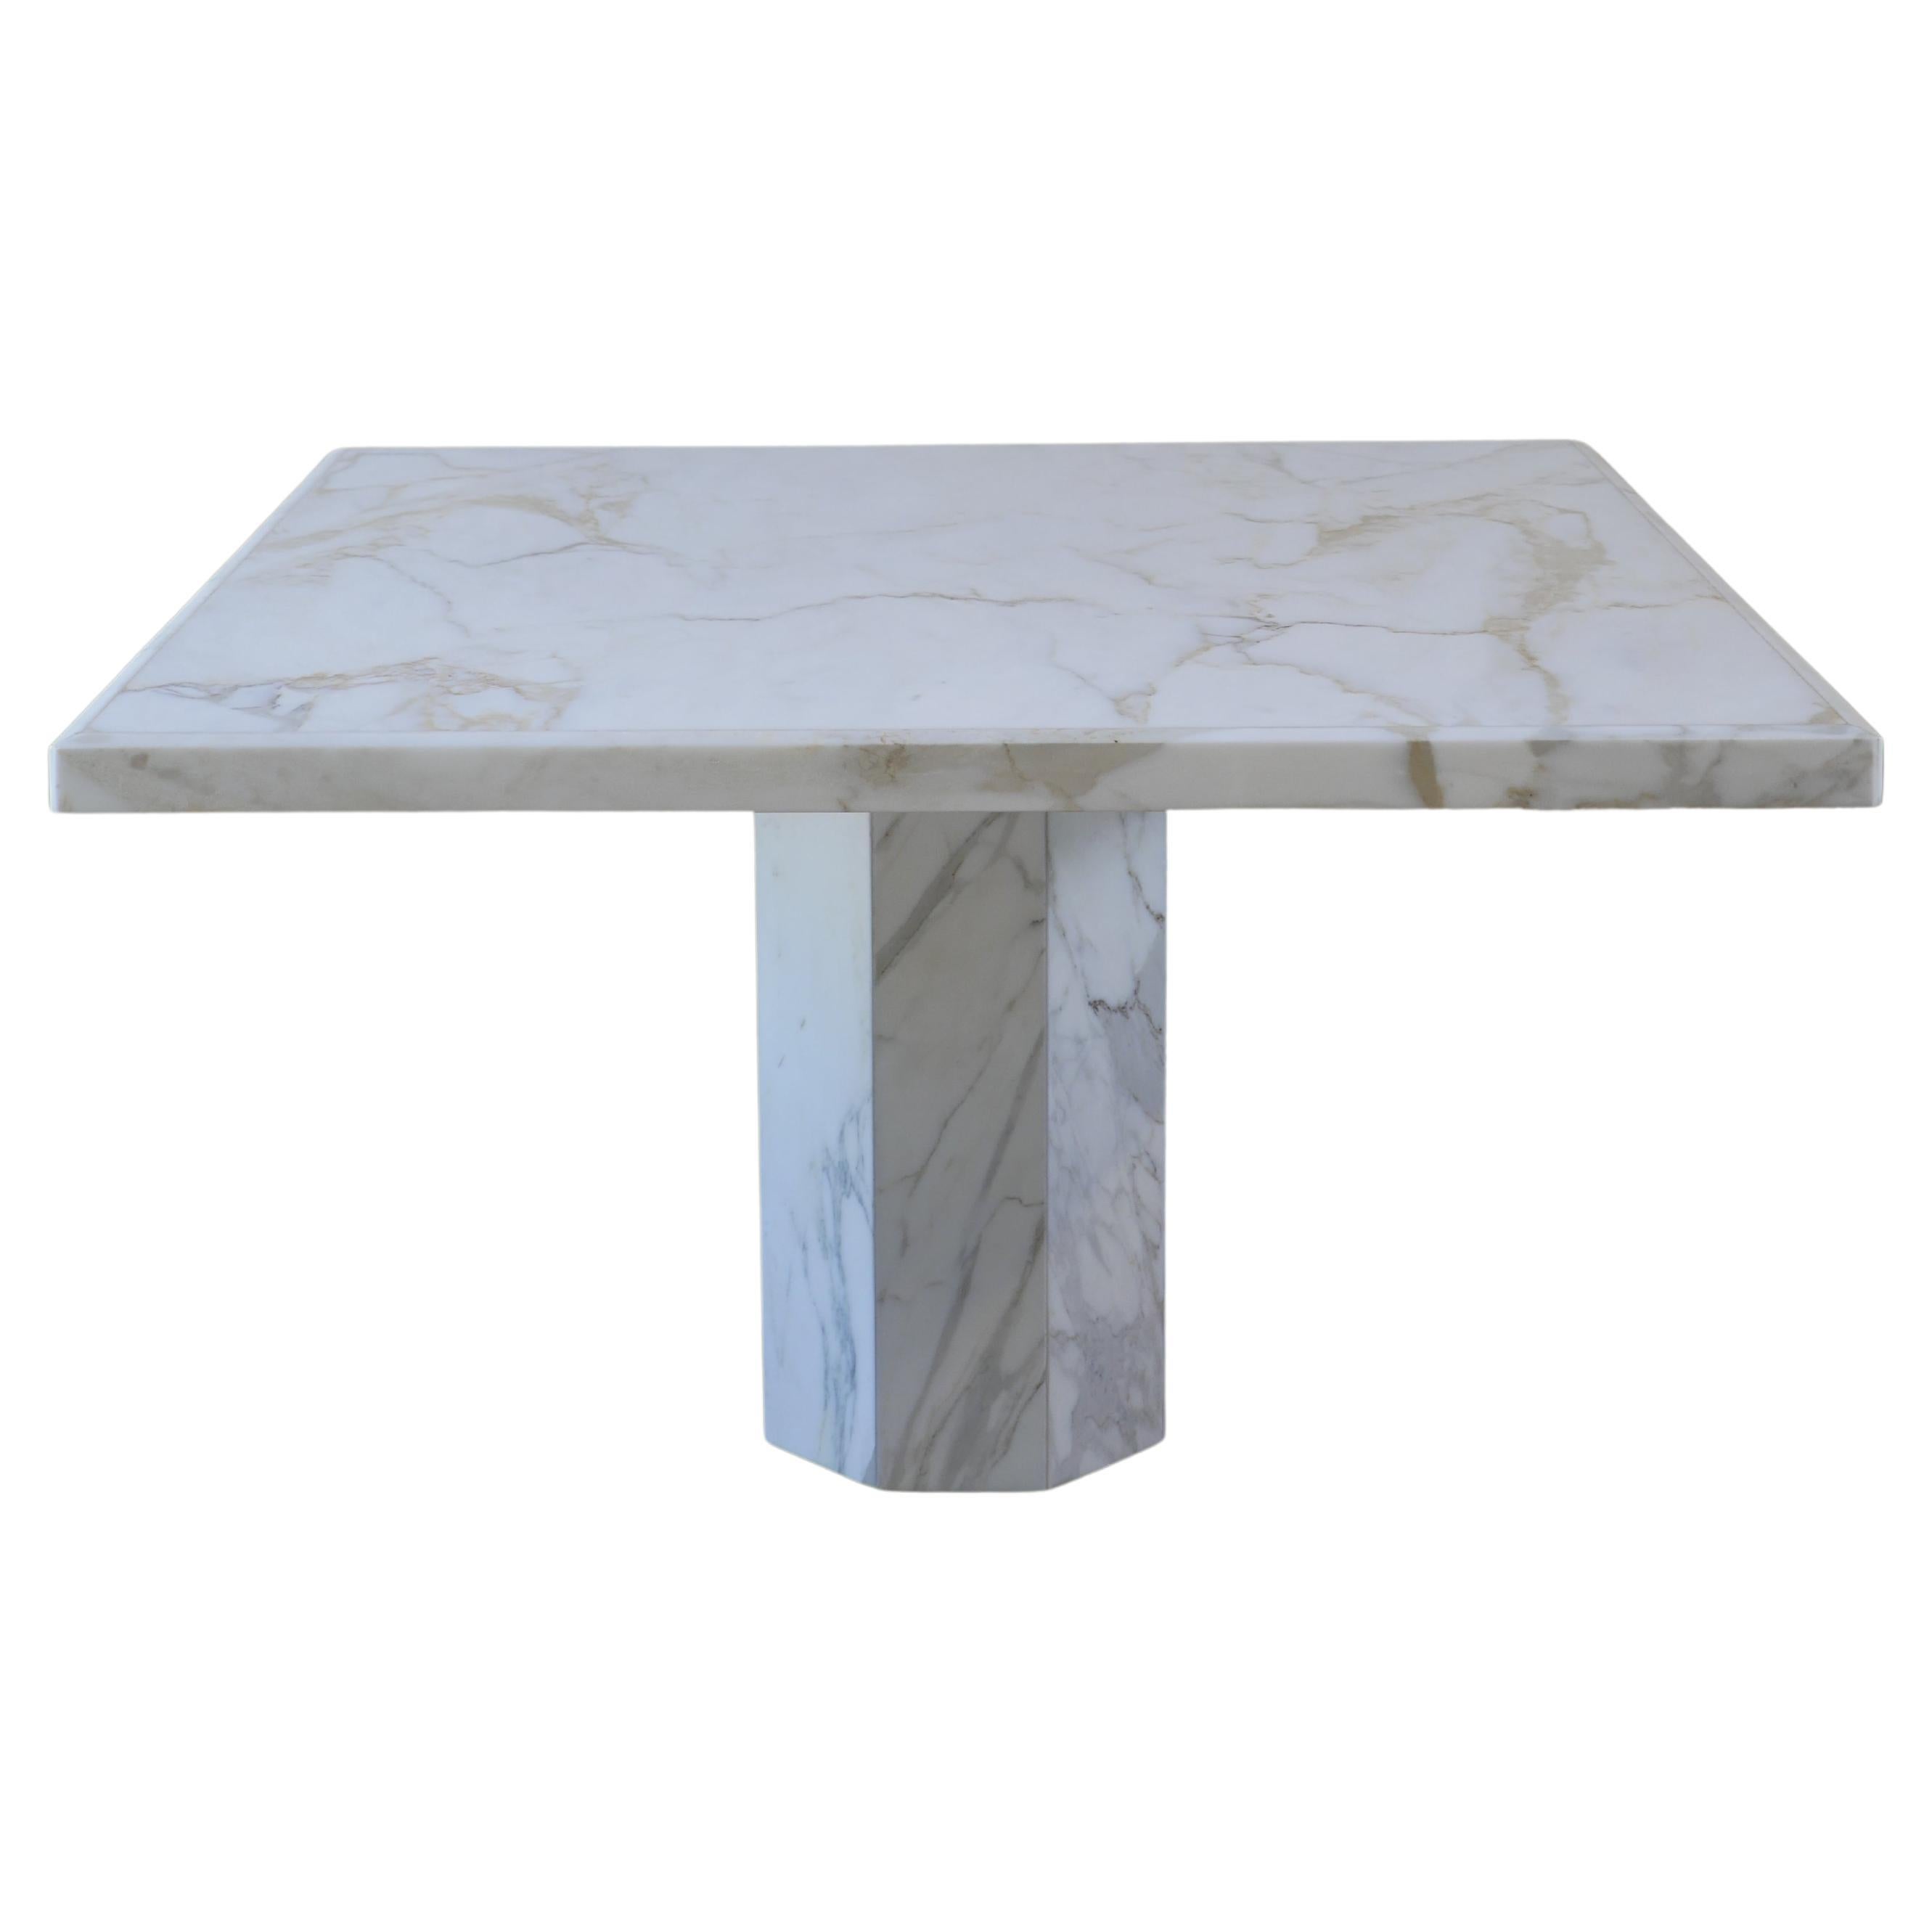 1970s Italian Calacatta Gold Polished Marble Dining Pedestal Table